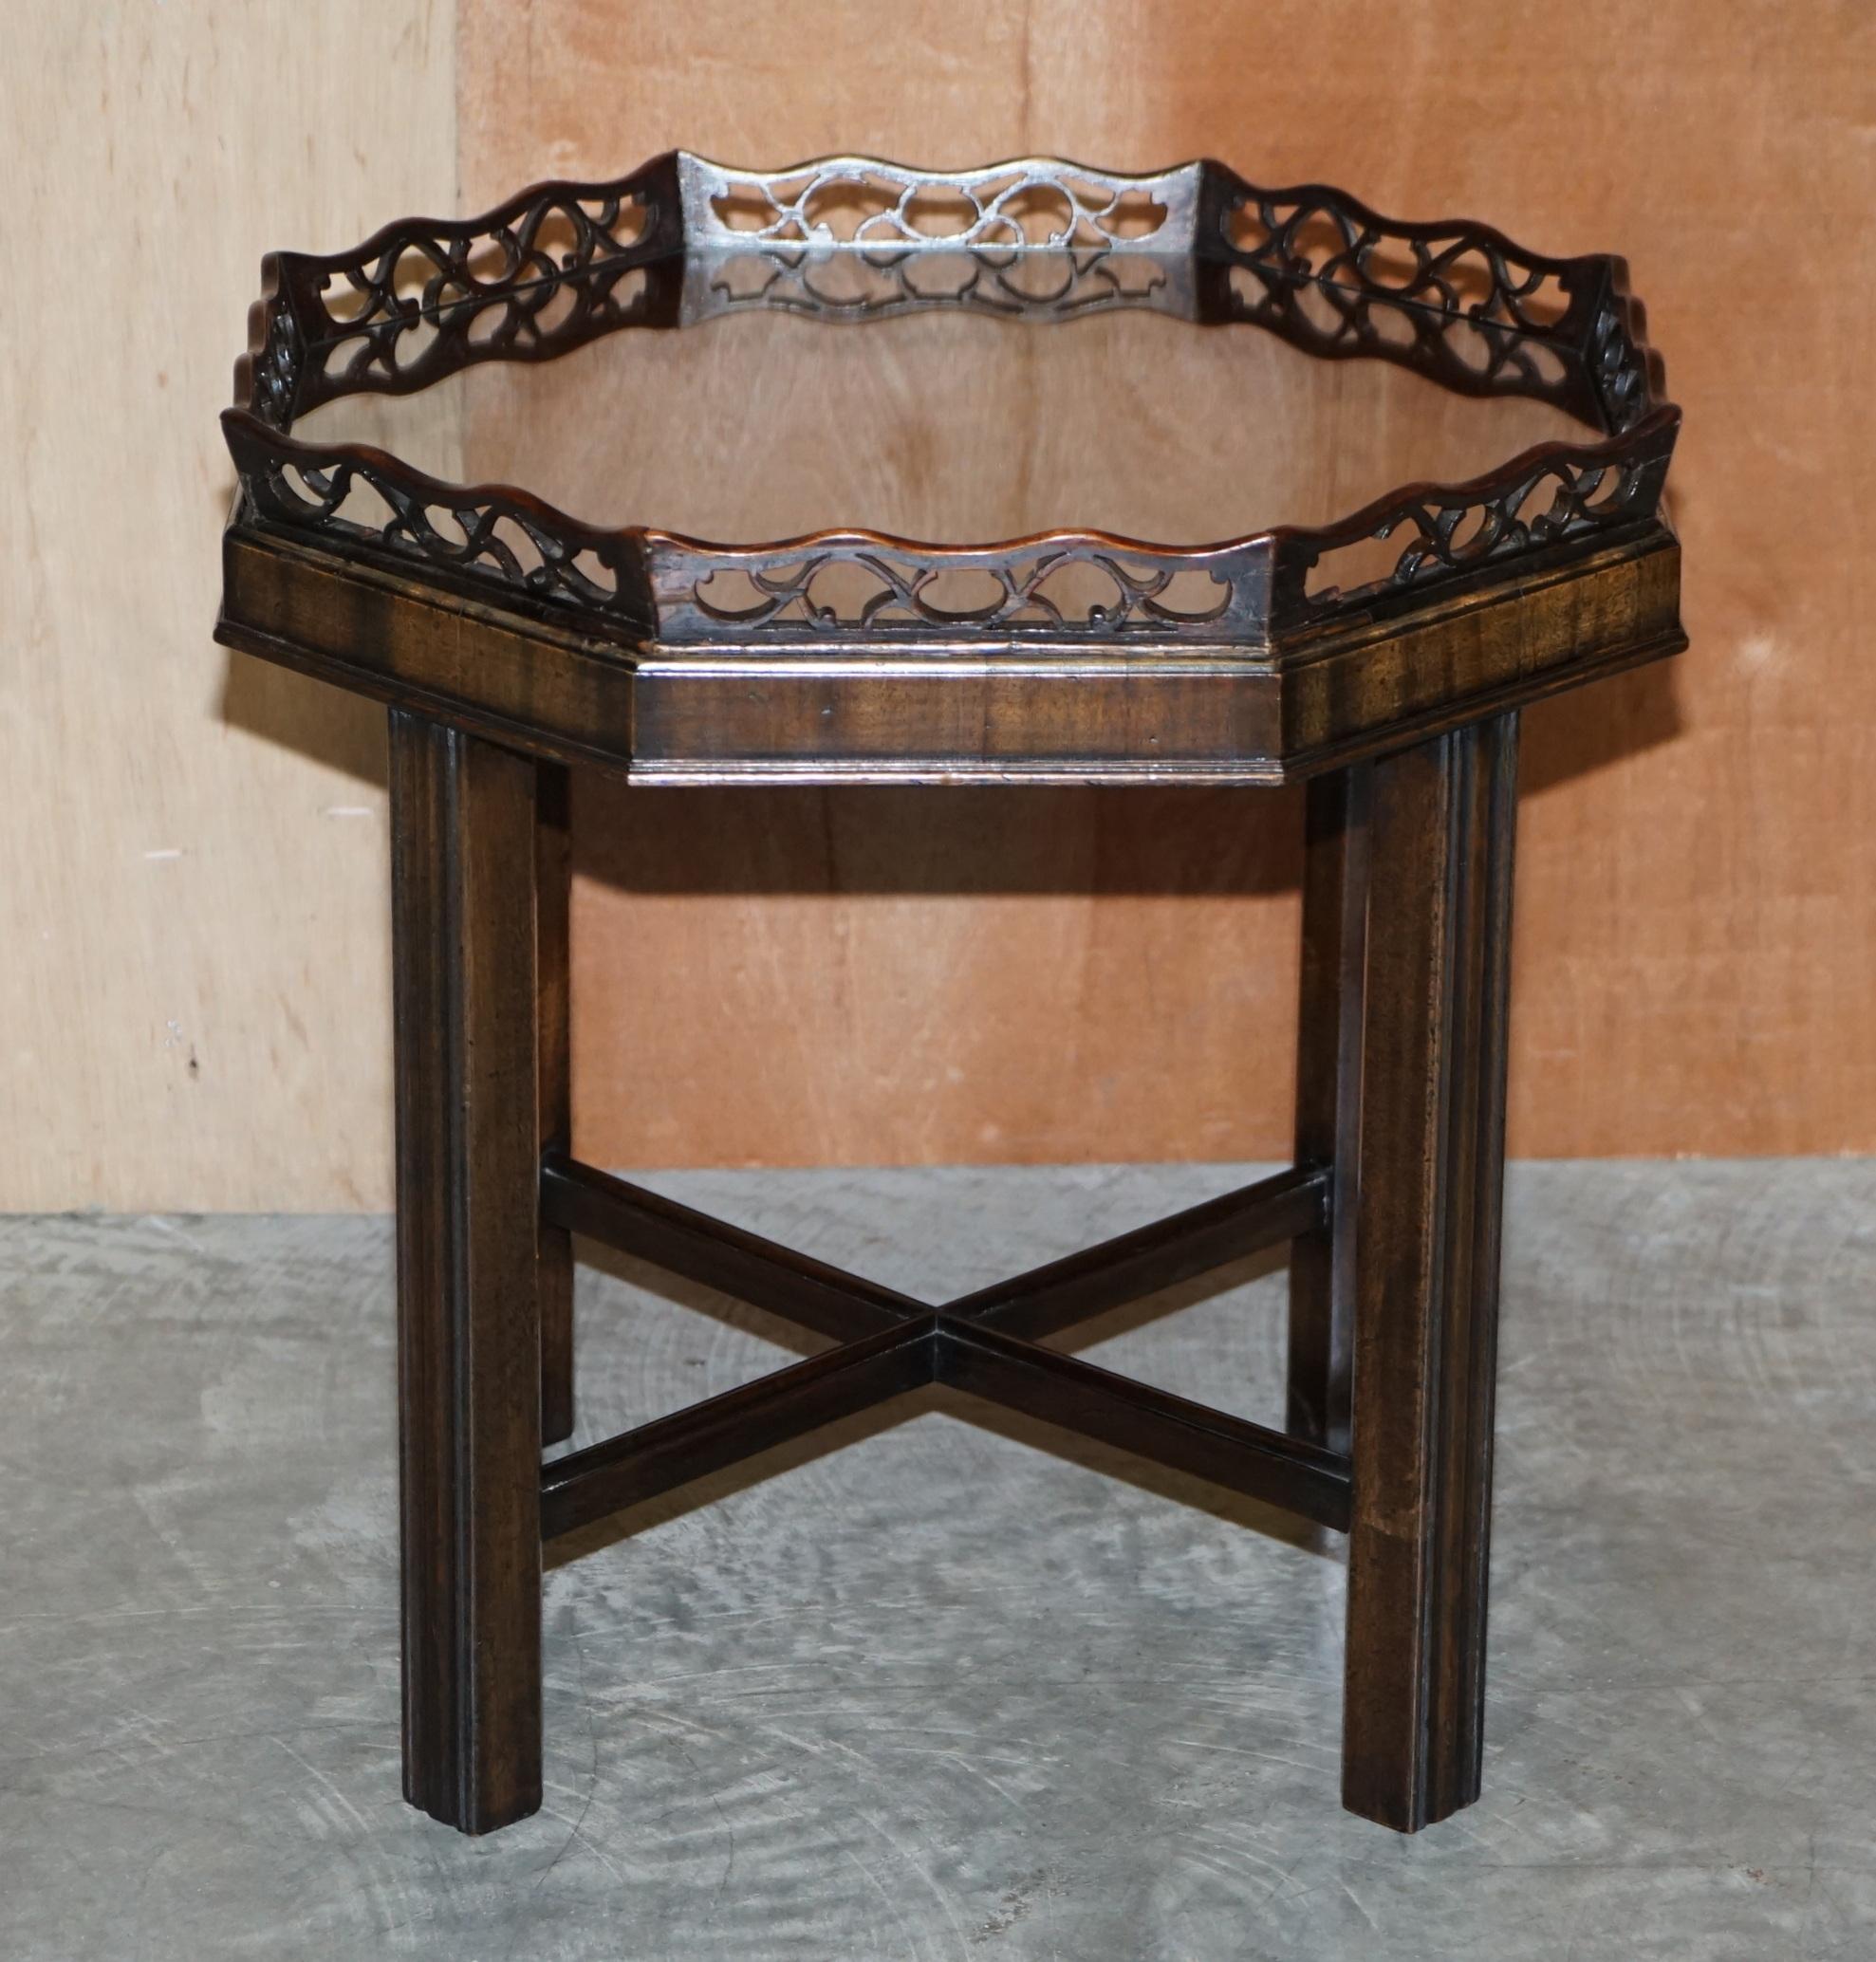 Hand-Crafted Antique Thomas Chippendale Fret Work Carved Card Games Tray Table Removable Top For Sale